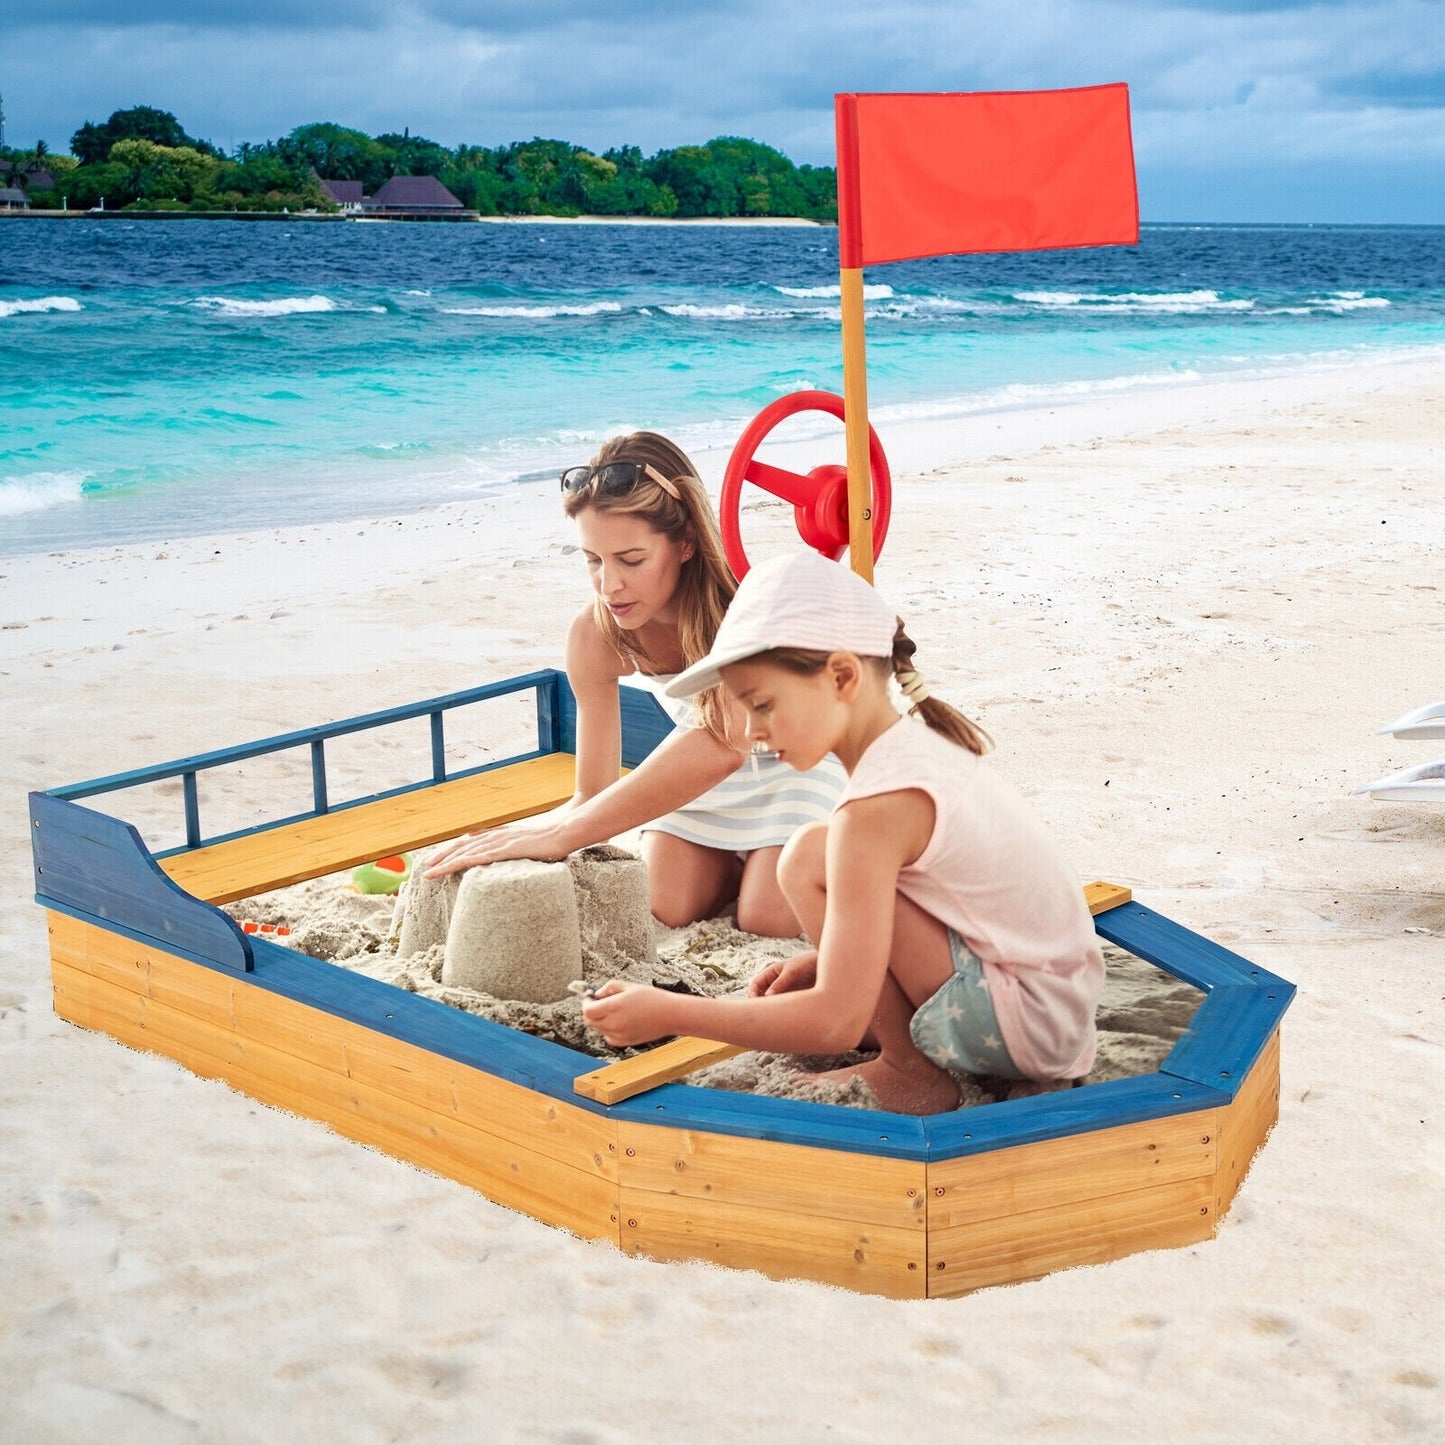 Kids' Pirate Boat Sandbox with Flag and Rudder, Natural